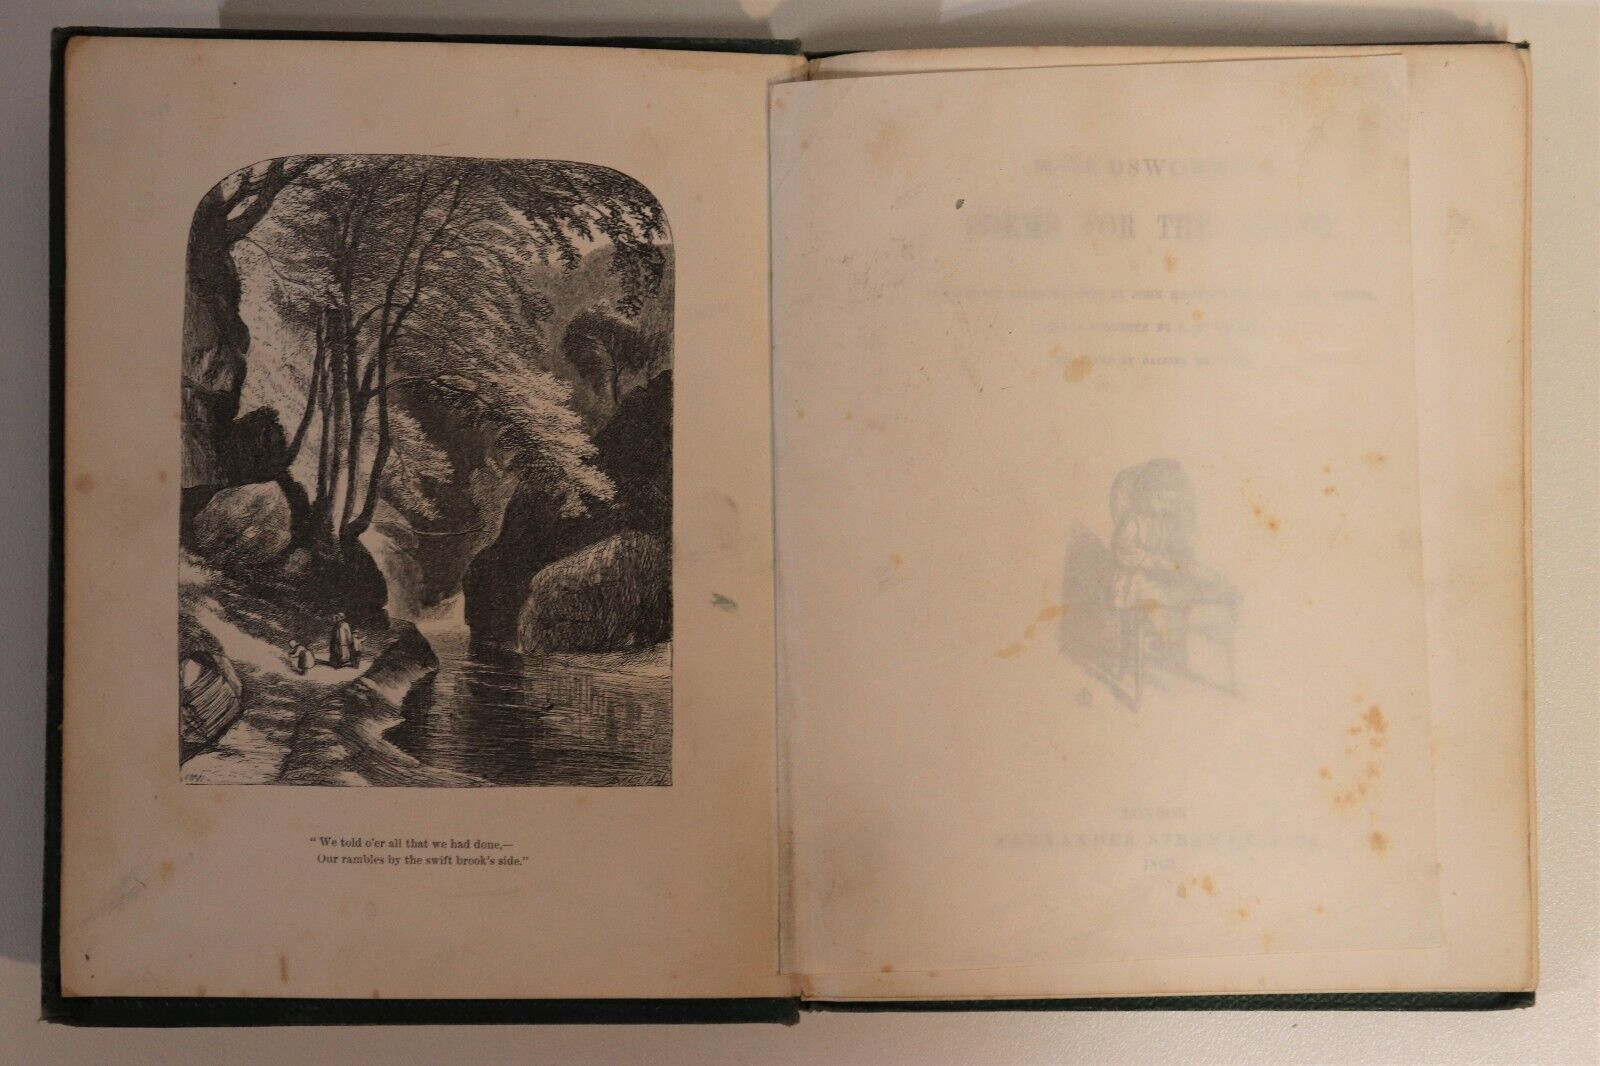 Wordsworth's Poems For The Young - 1863 - Antique Poetry Book